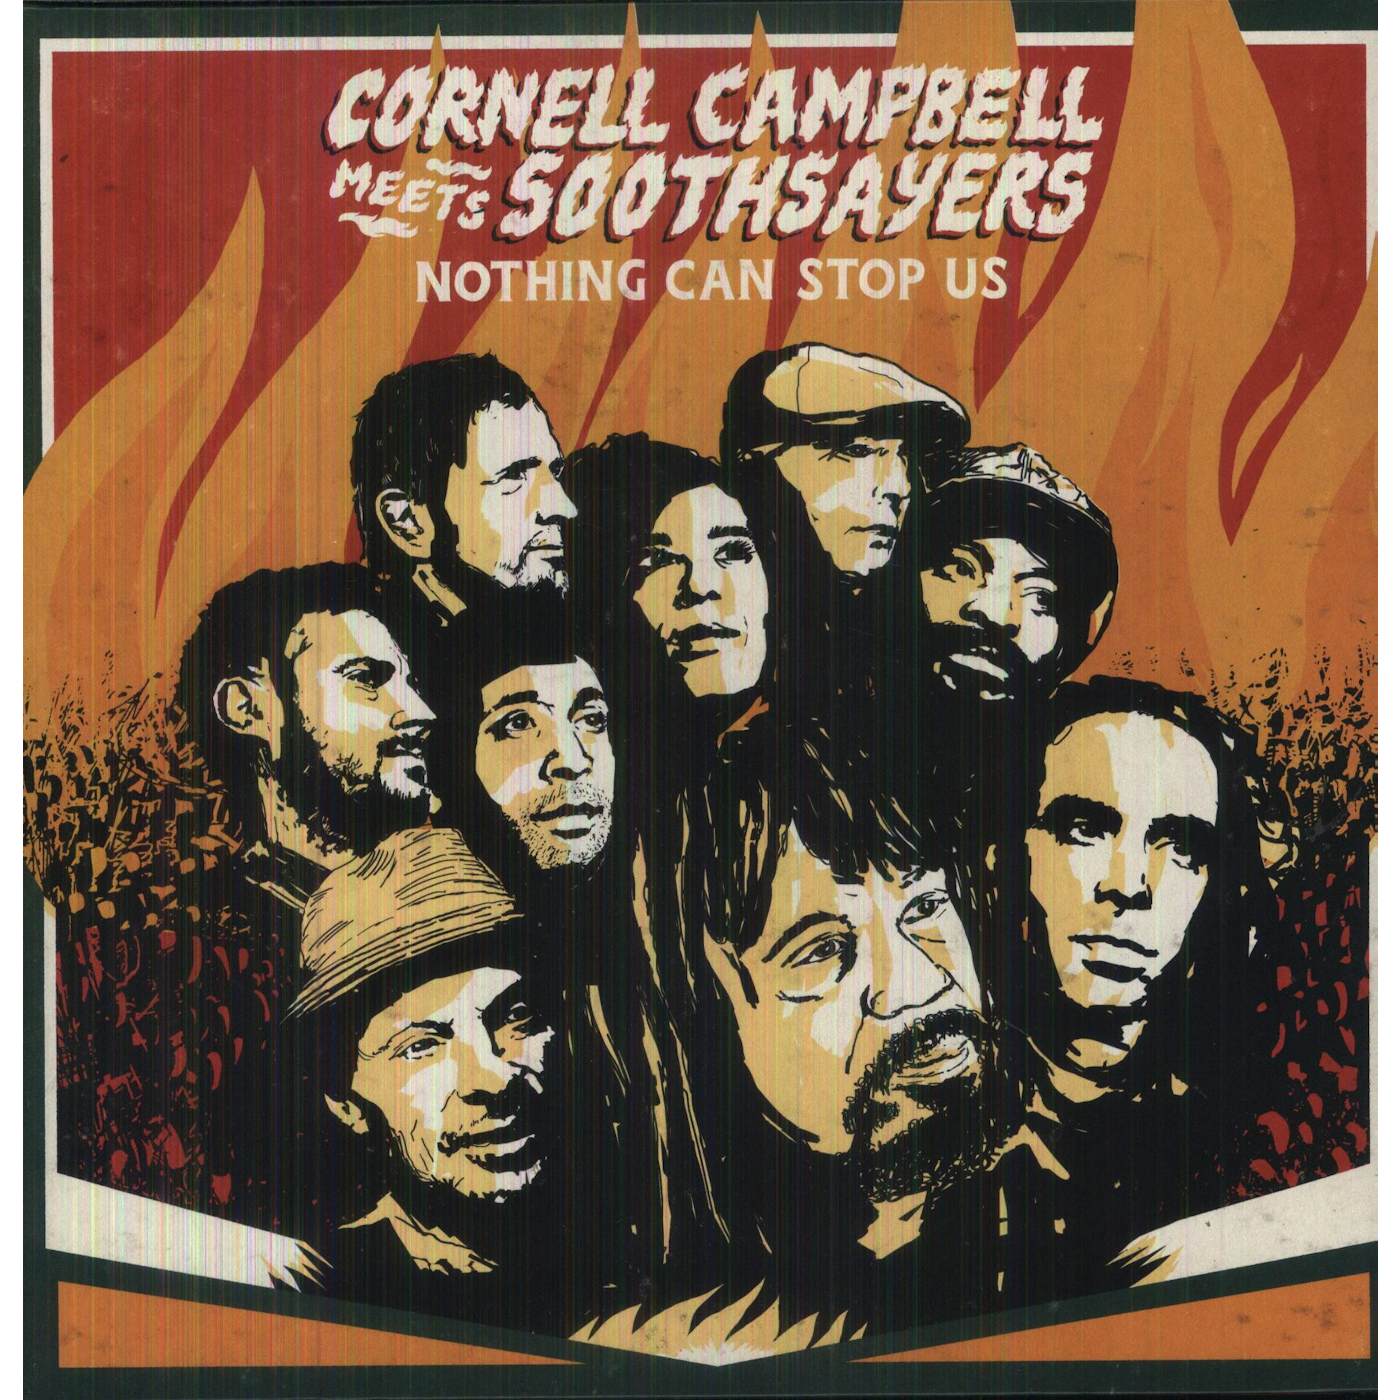 Cornell Campbell Meets Soothsayers Nothing Can Stop Us Vinyl Record